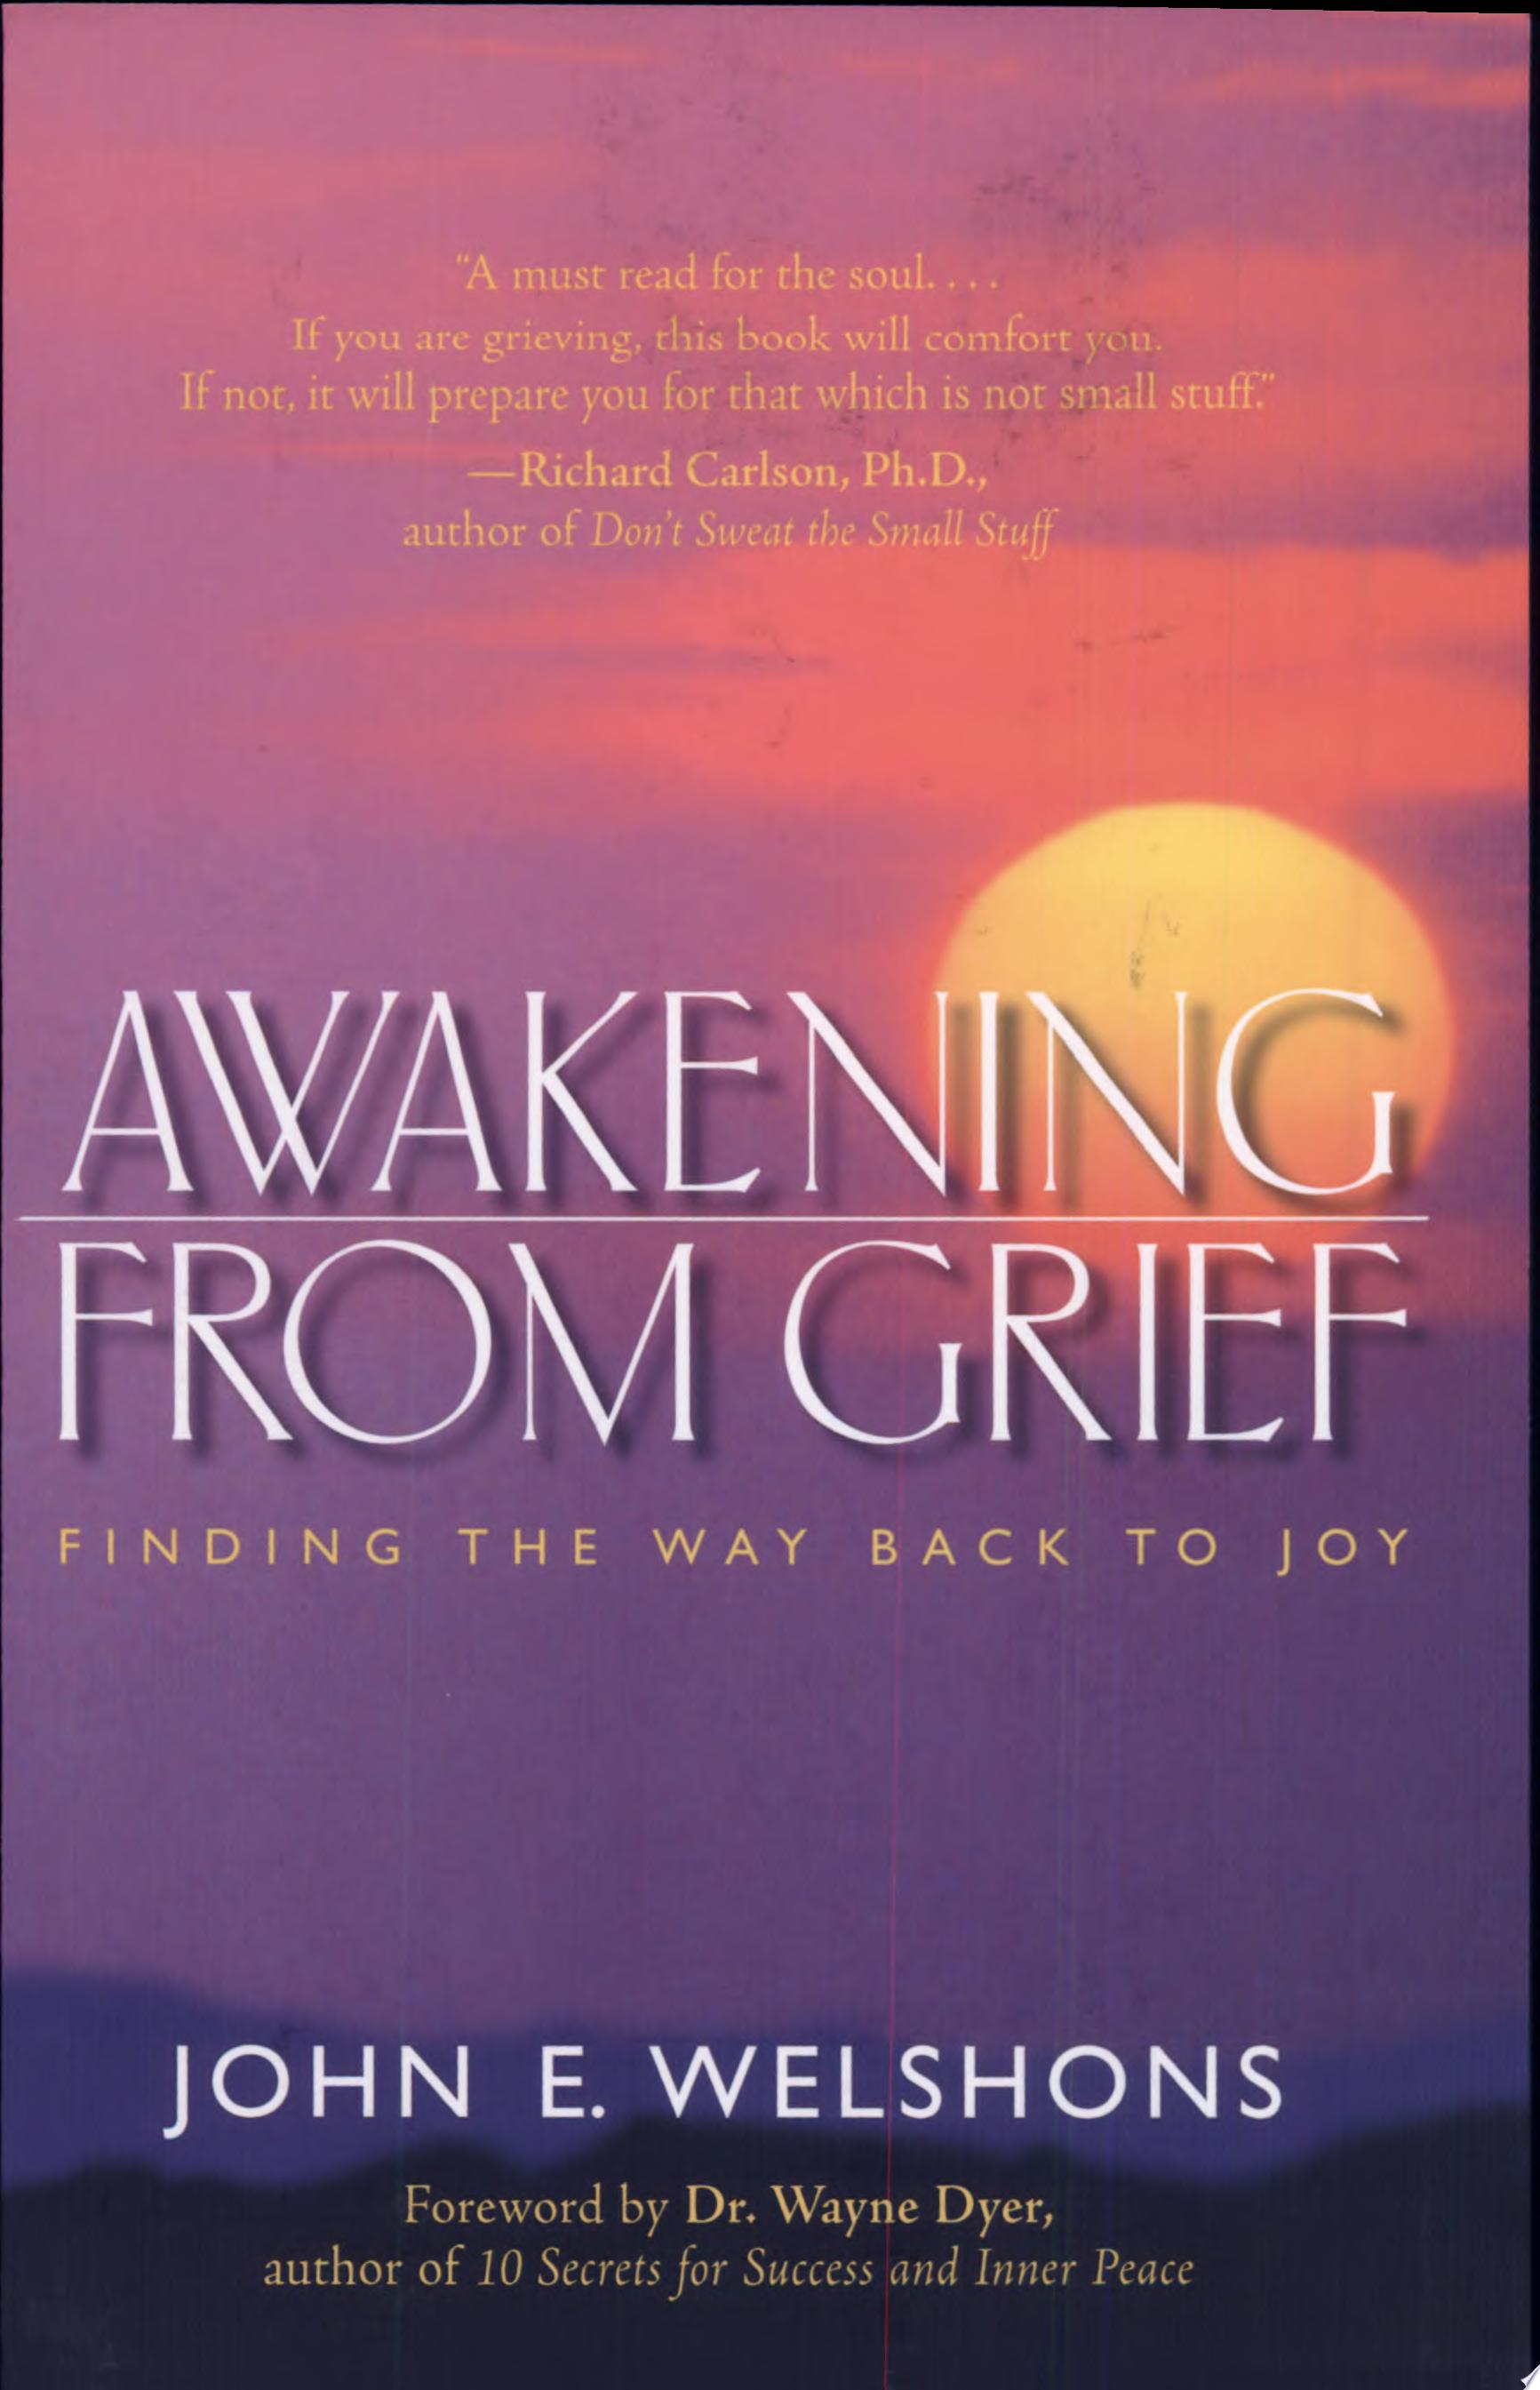 Image for "Awakening from Grief"